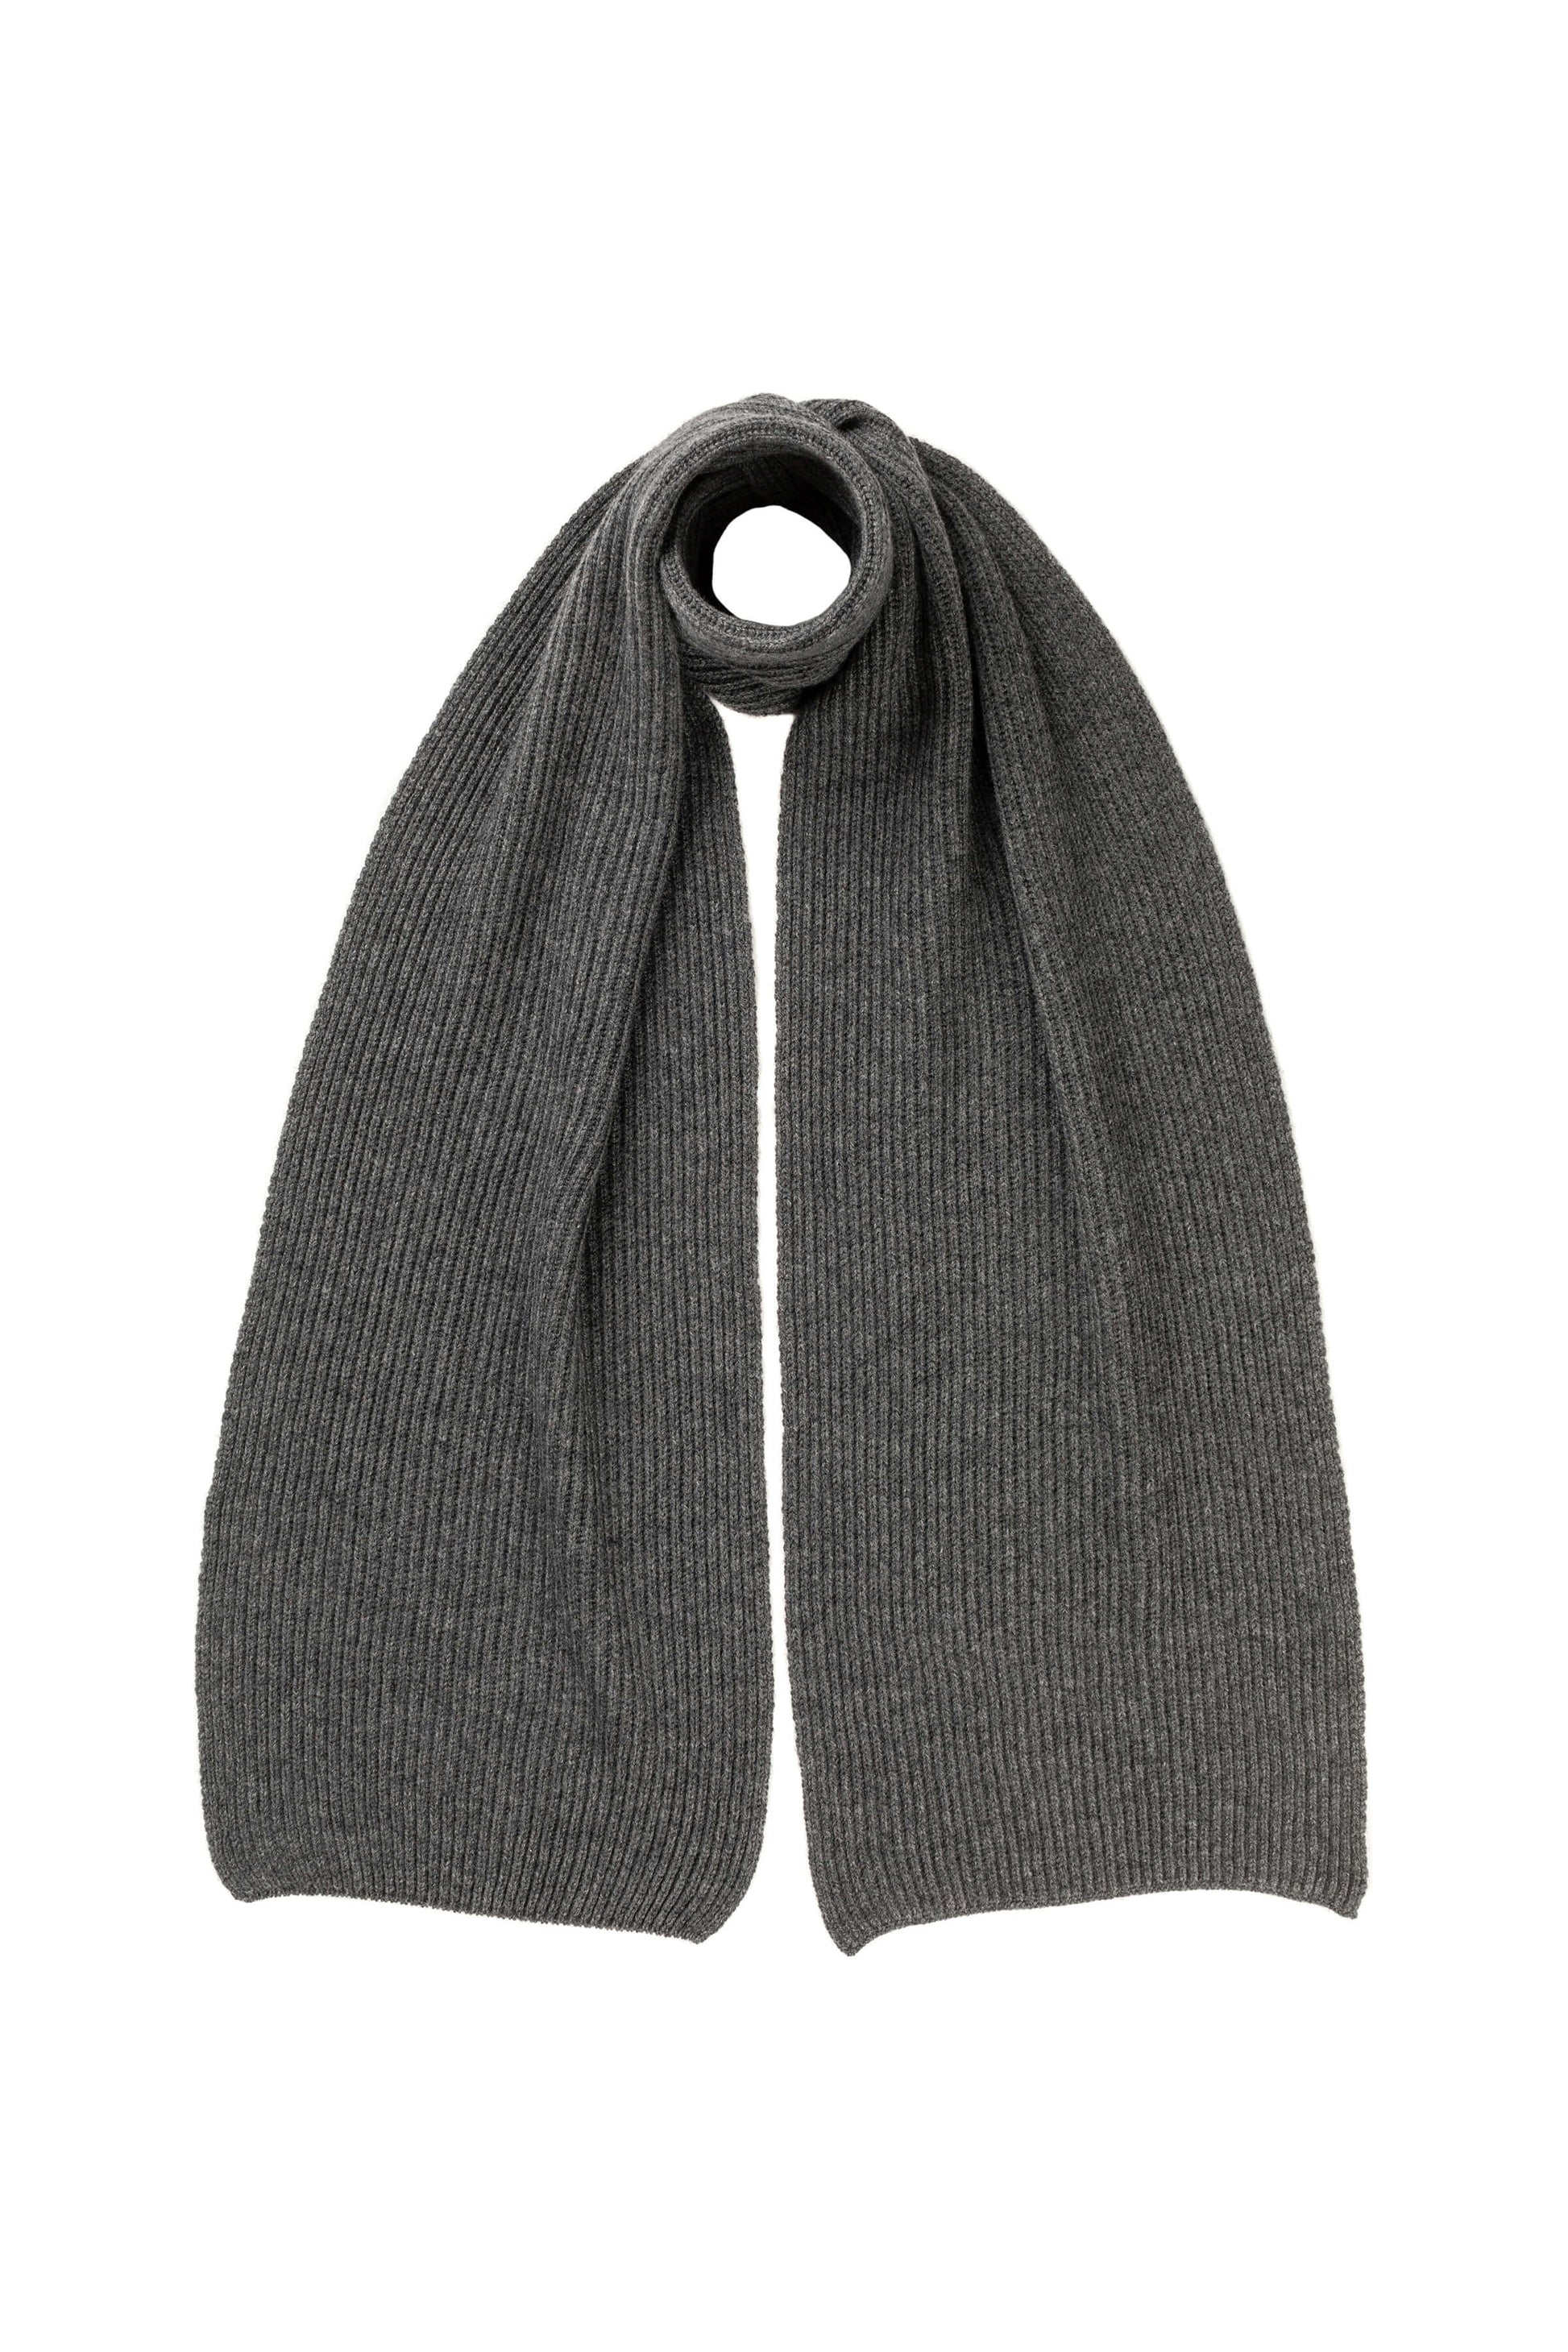 Johnstons of Elgin Knitted Accessories Mid Grey Cashmere Ribbed Scarf HAA01684HA4181ONE